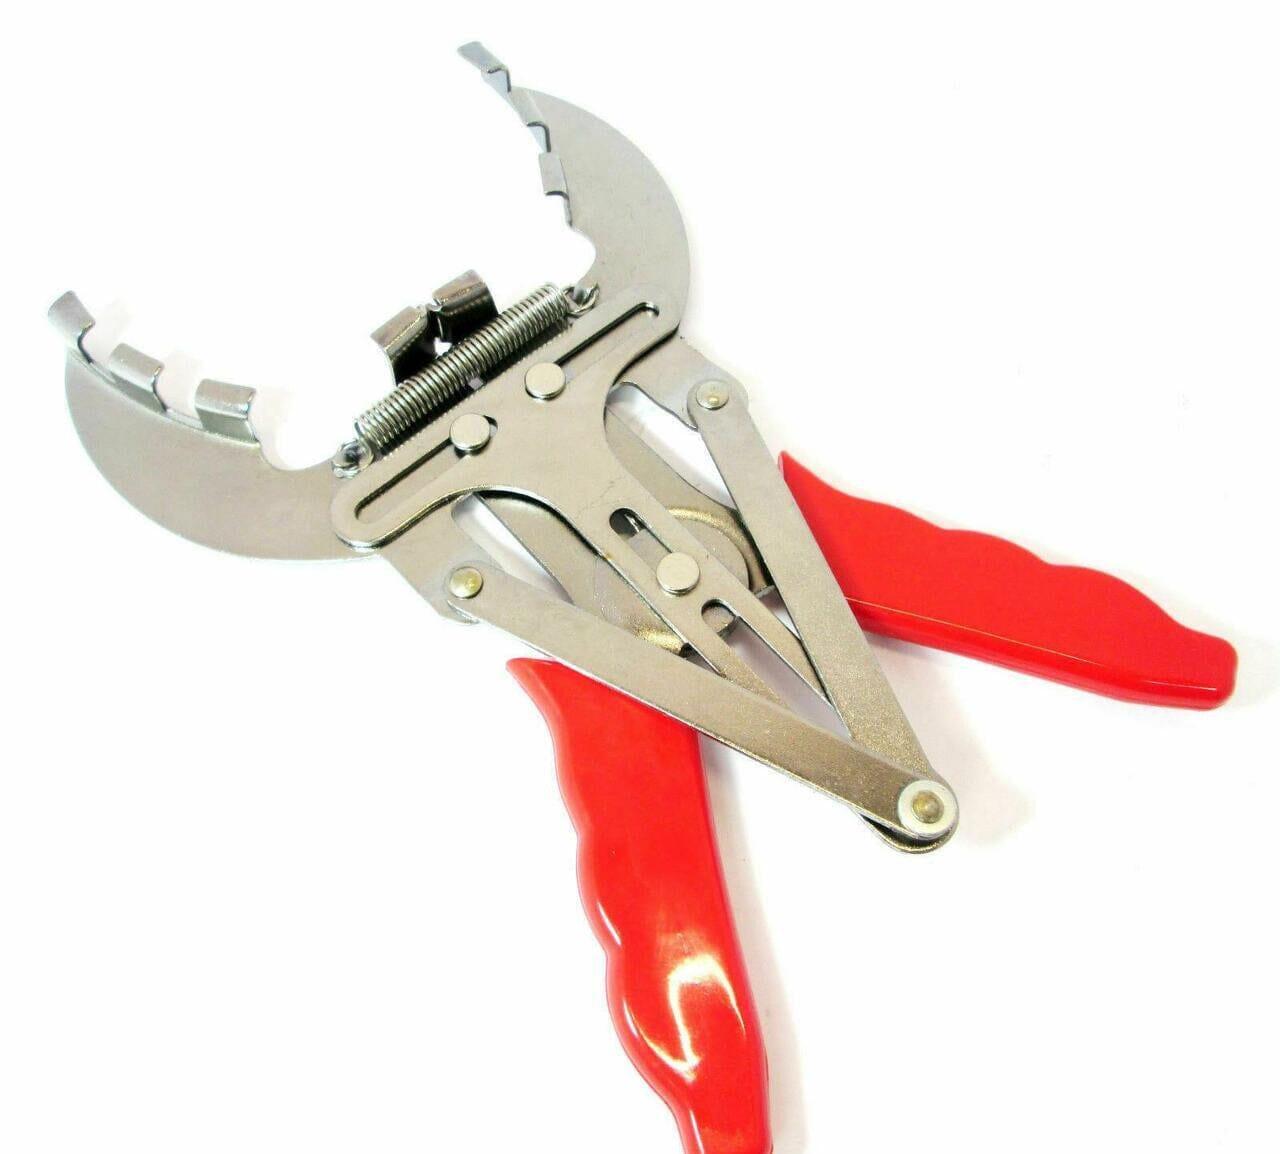 Piston Ring Expander Remover Removal Pliers 50-100mm AU076 - Tools 2U Direct SW